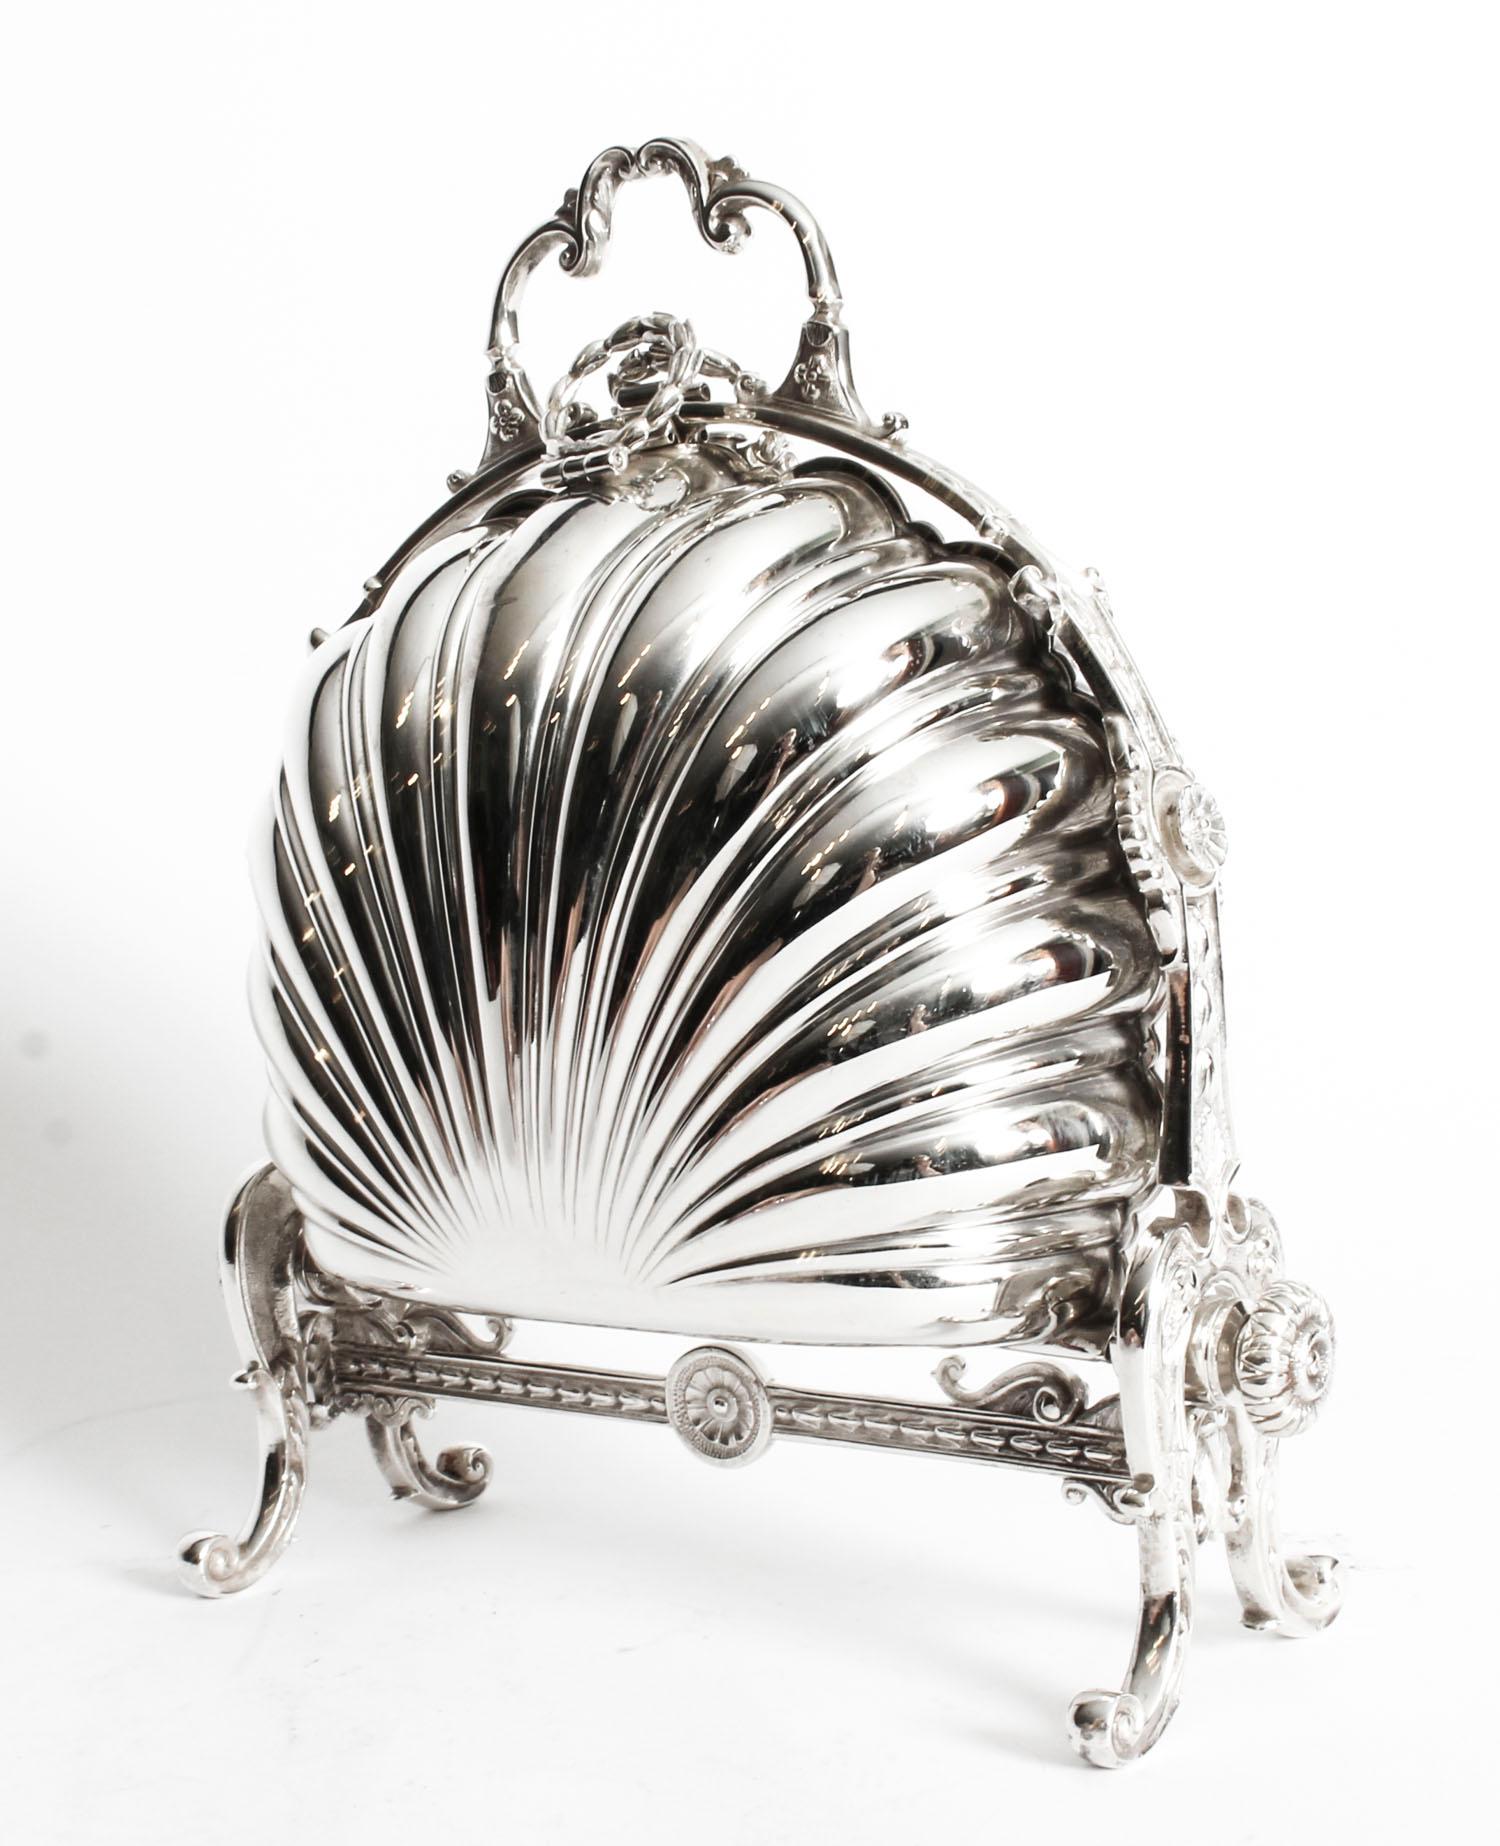 English Antique Victorian Silver Plated Shell Folding Biscuit Box, 19th Century